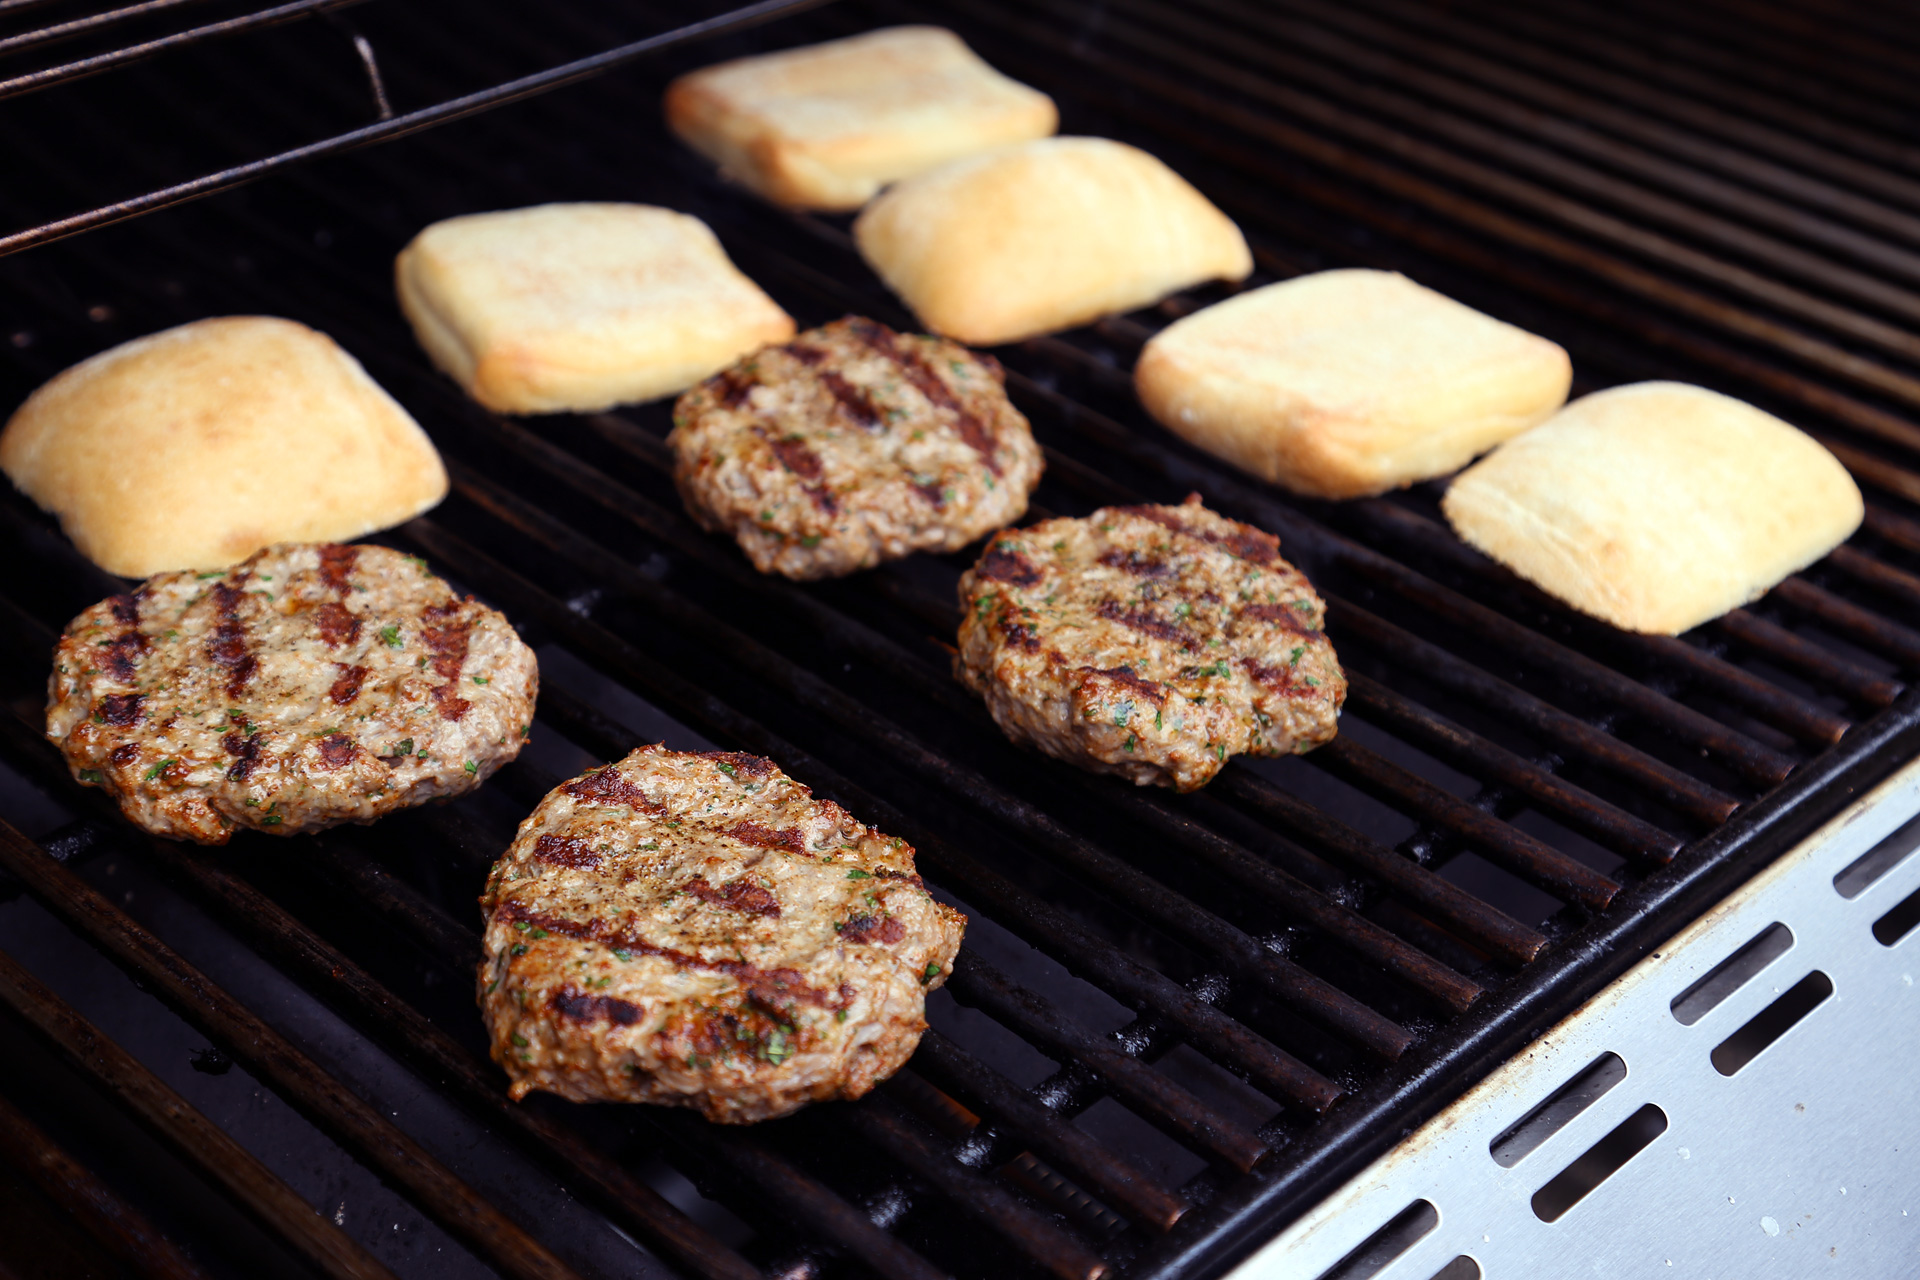 Grill the buns (cut side down) until lightly toasted.